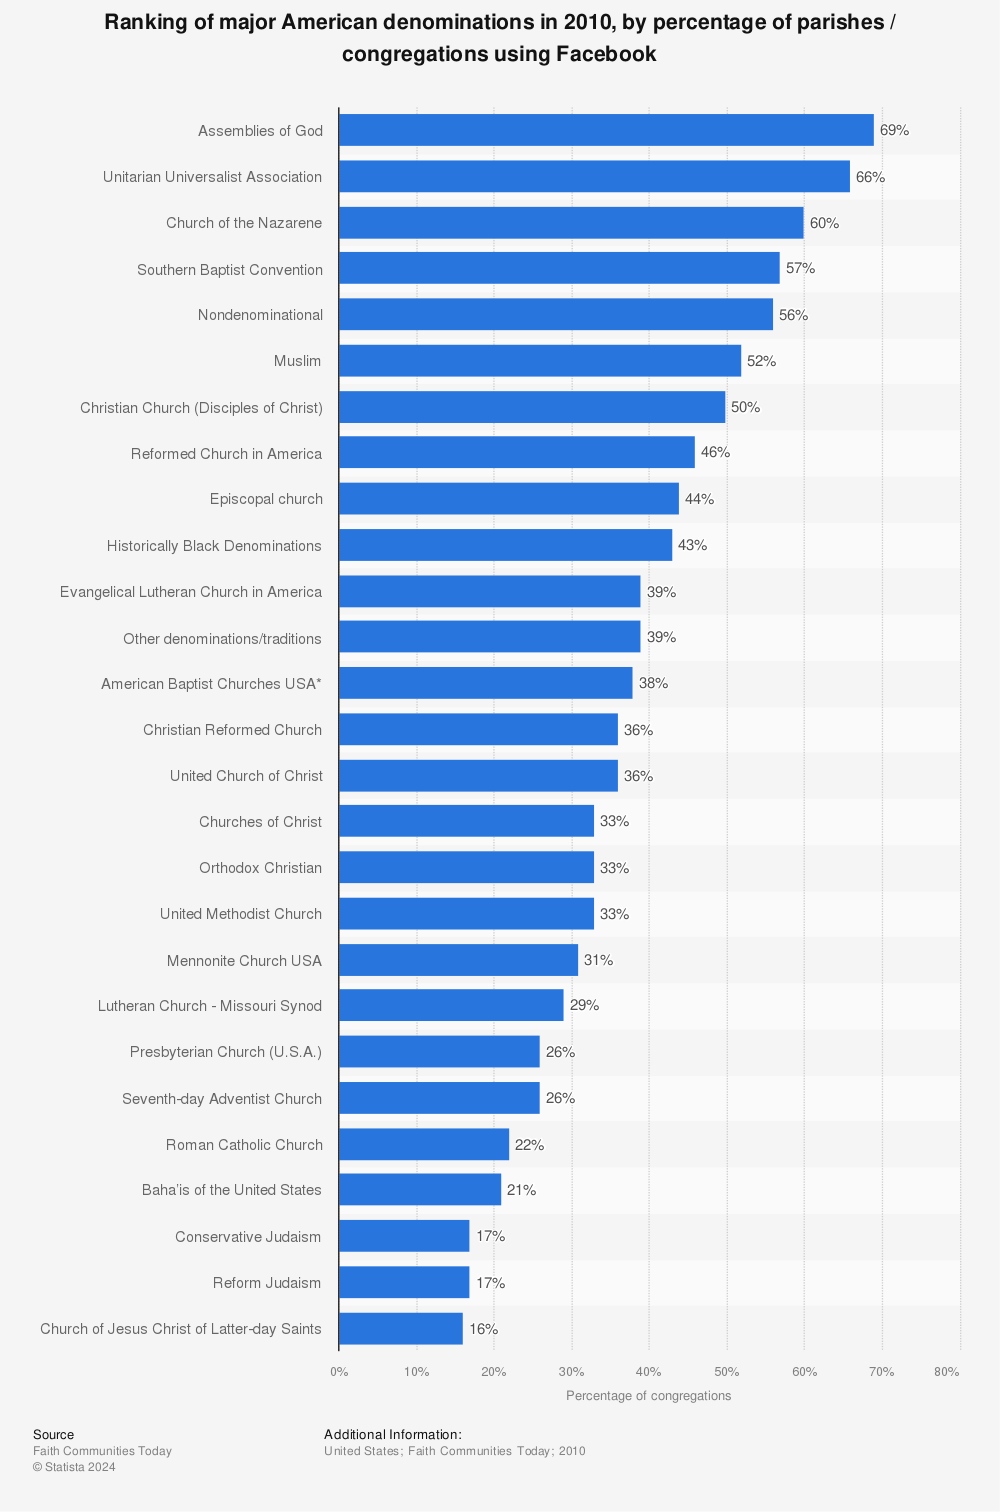 Statistic: Ranking of major American denominations in 2010, by percentage of parishes / congregations using Facebook | Statista